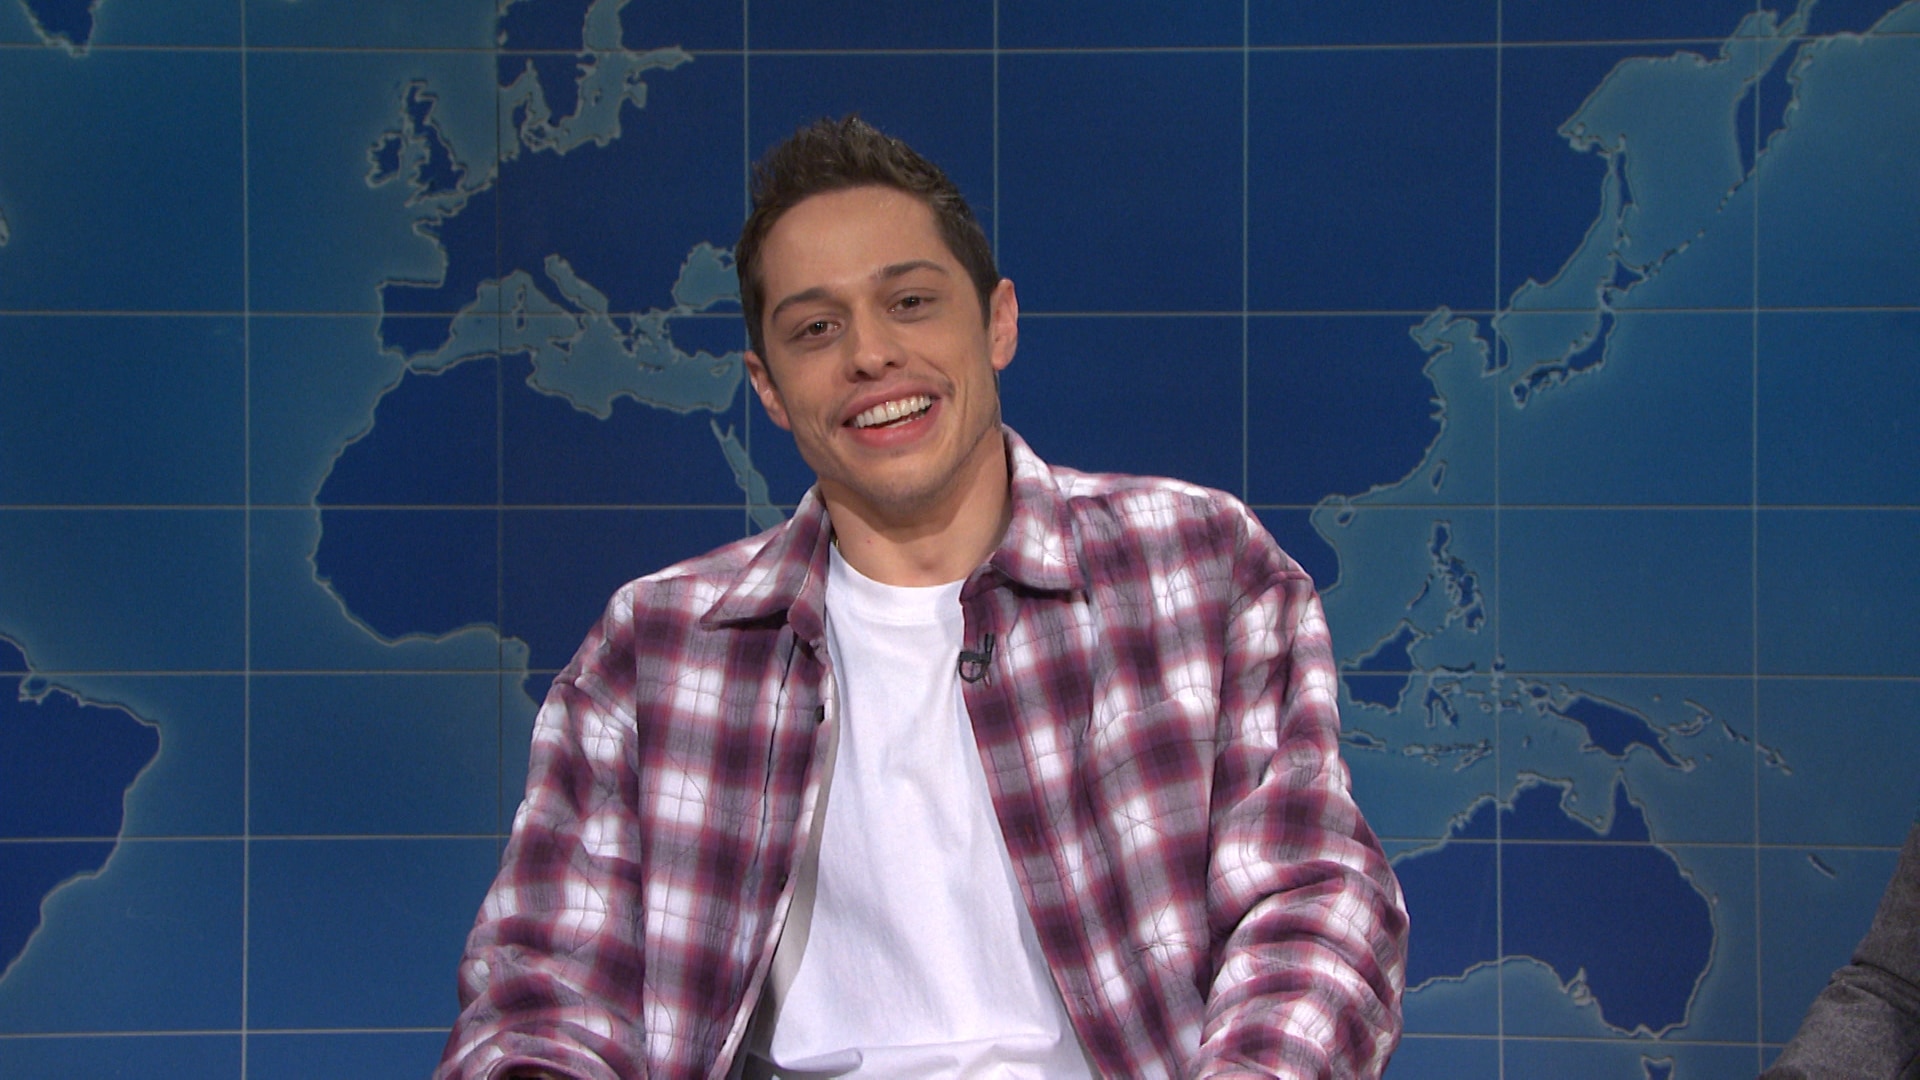 What Episode Of Snl Is Pete Davidson On Watch Saturday Night Live Highlight: Weekend Update: Pete Davidson on